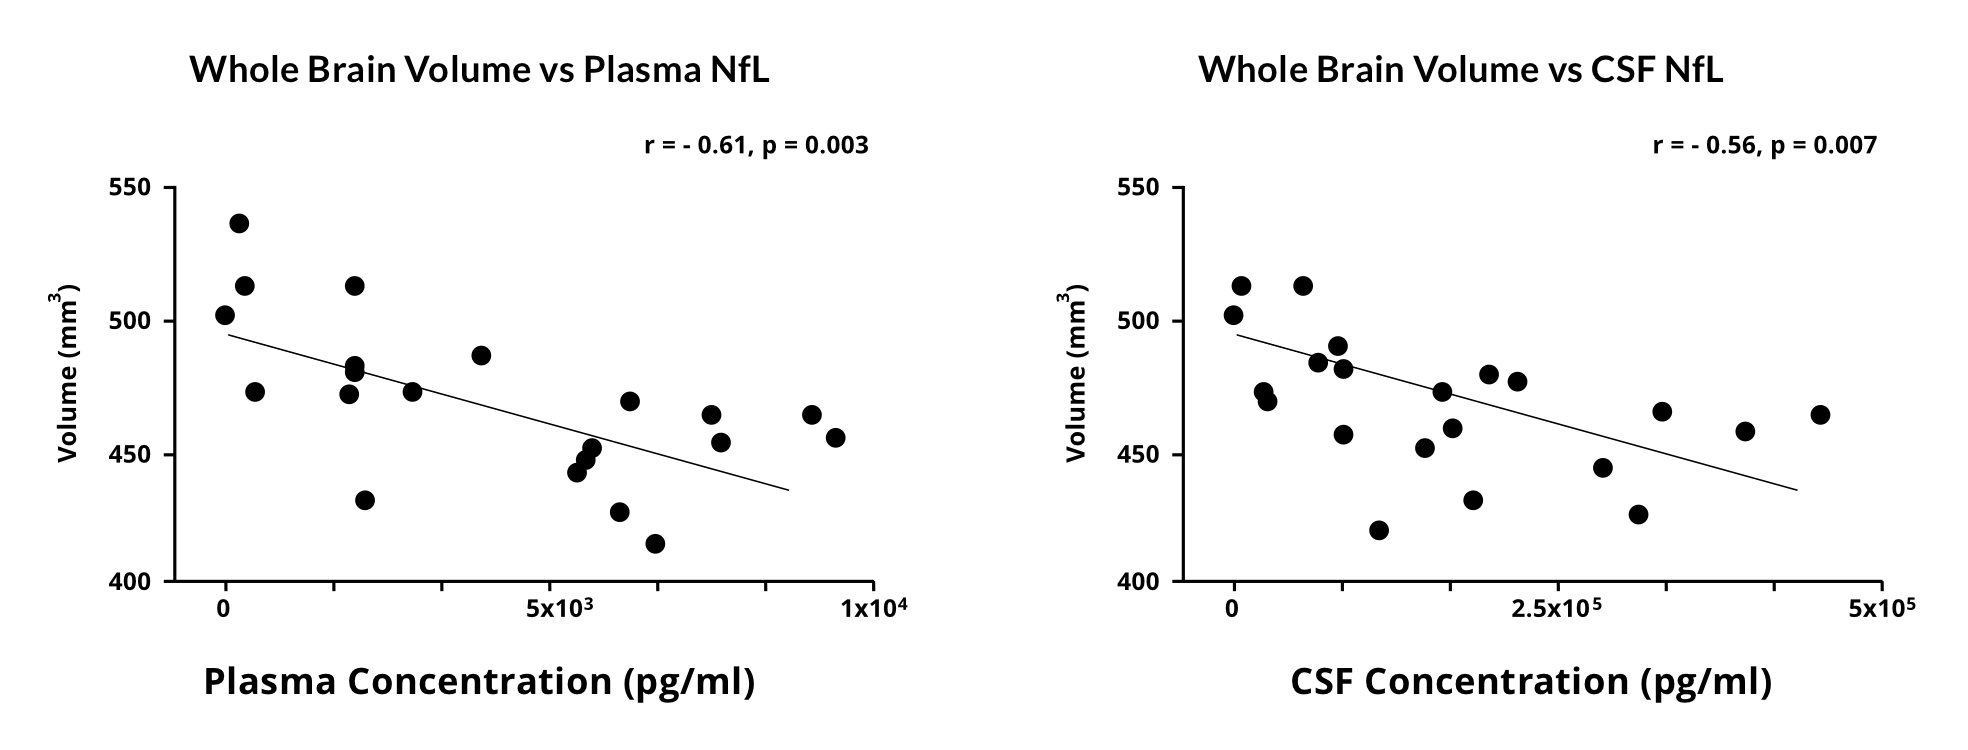 Graphs showing the relationship between plasma NfL levels and whole brain volume measured by MRI